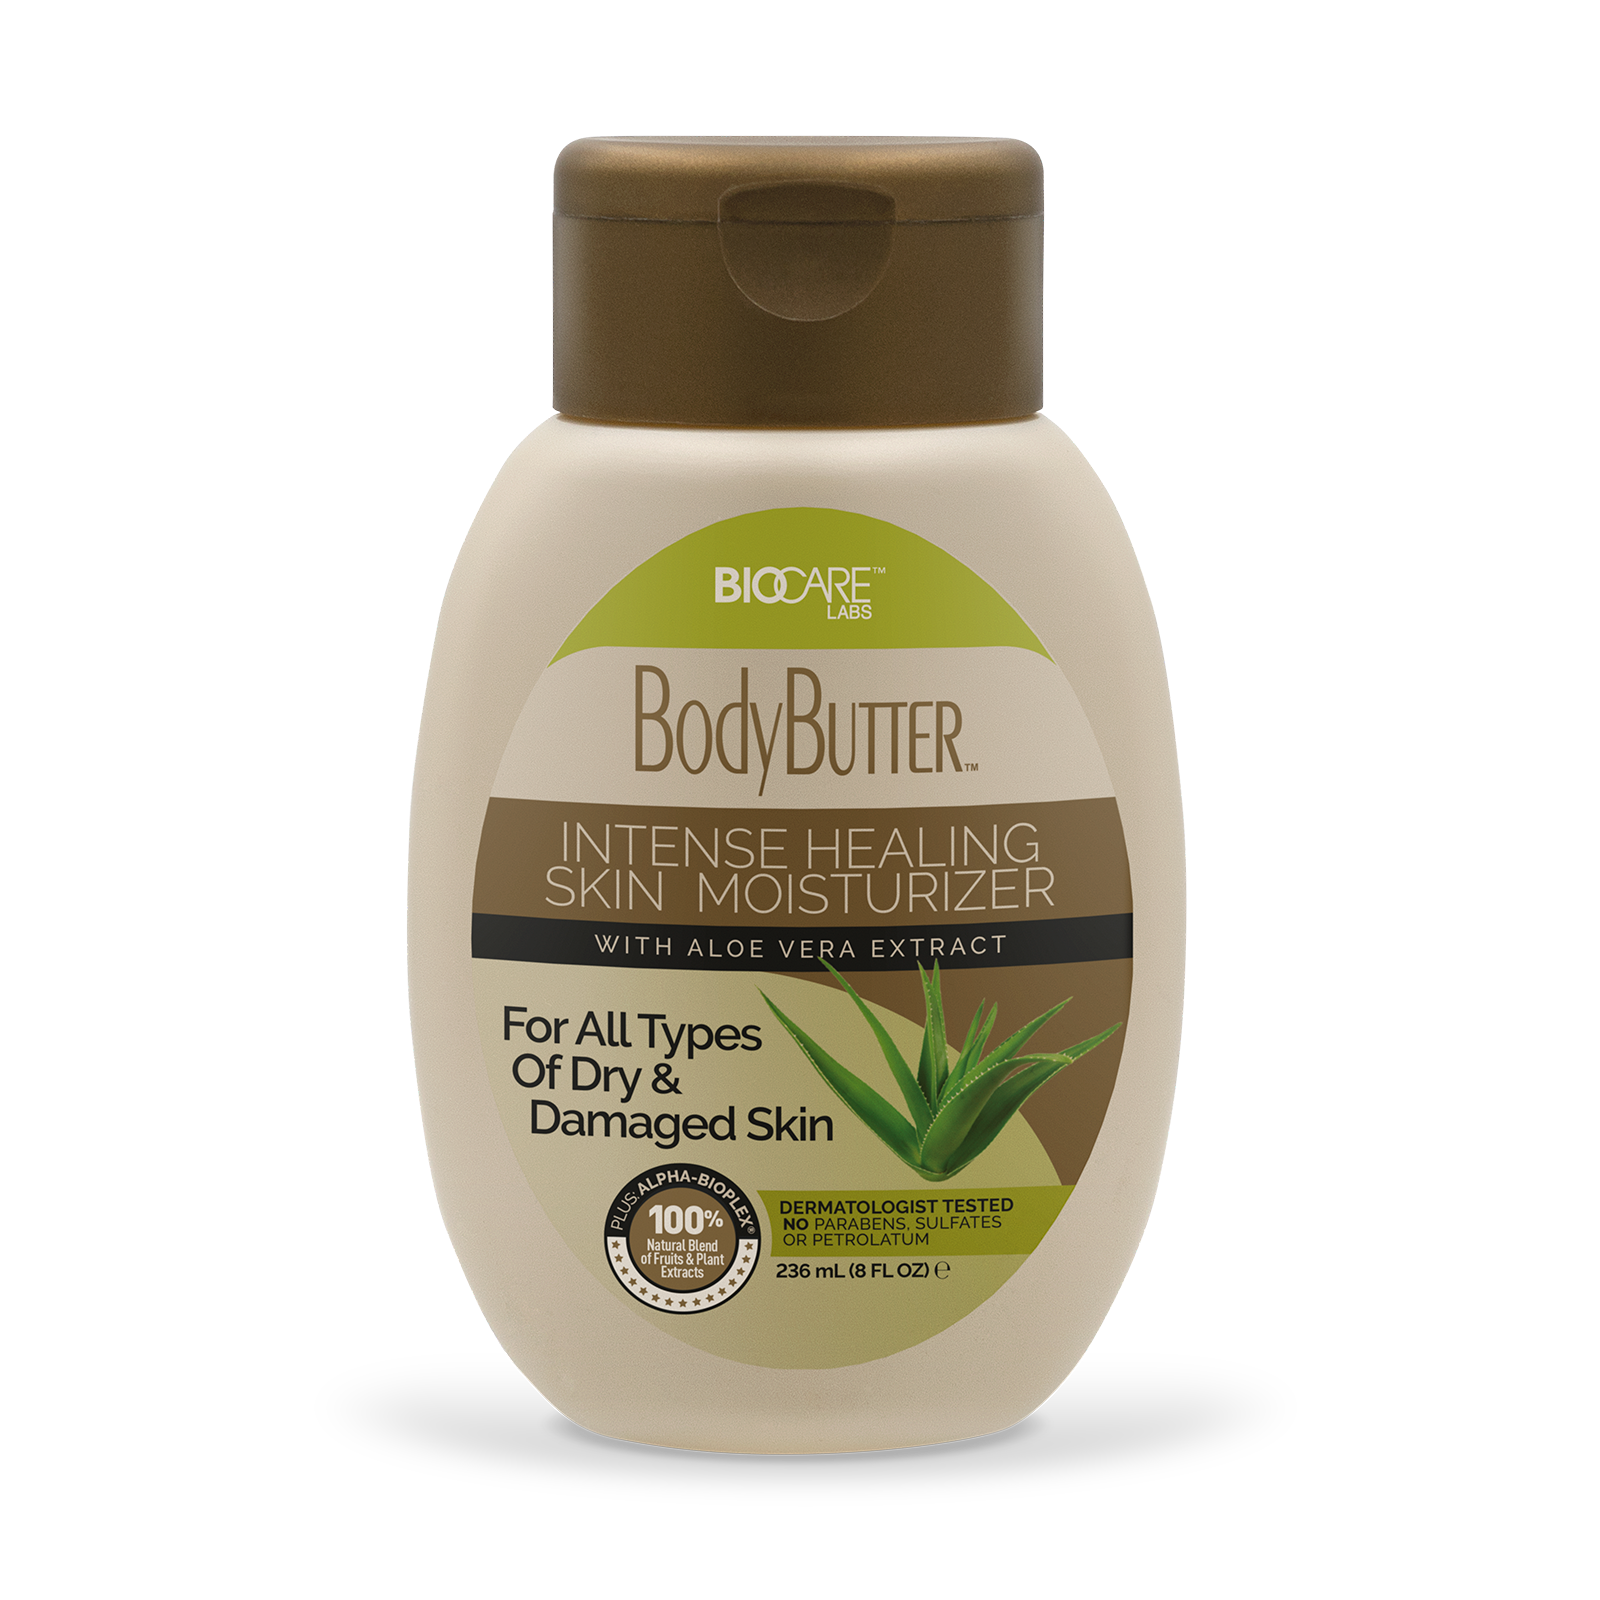 8 oz container of BodyButter™ With Aloe Vera Extract, Cucumber Extract, & Alpha-Bioplex ®